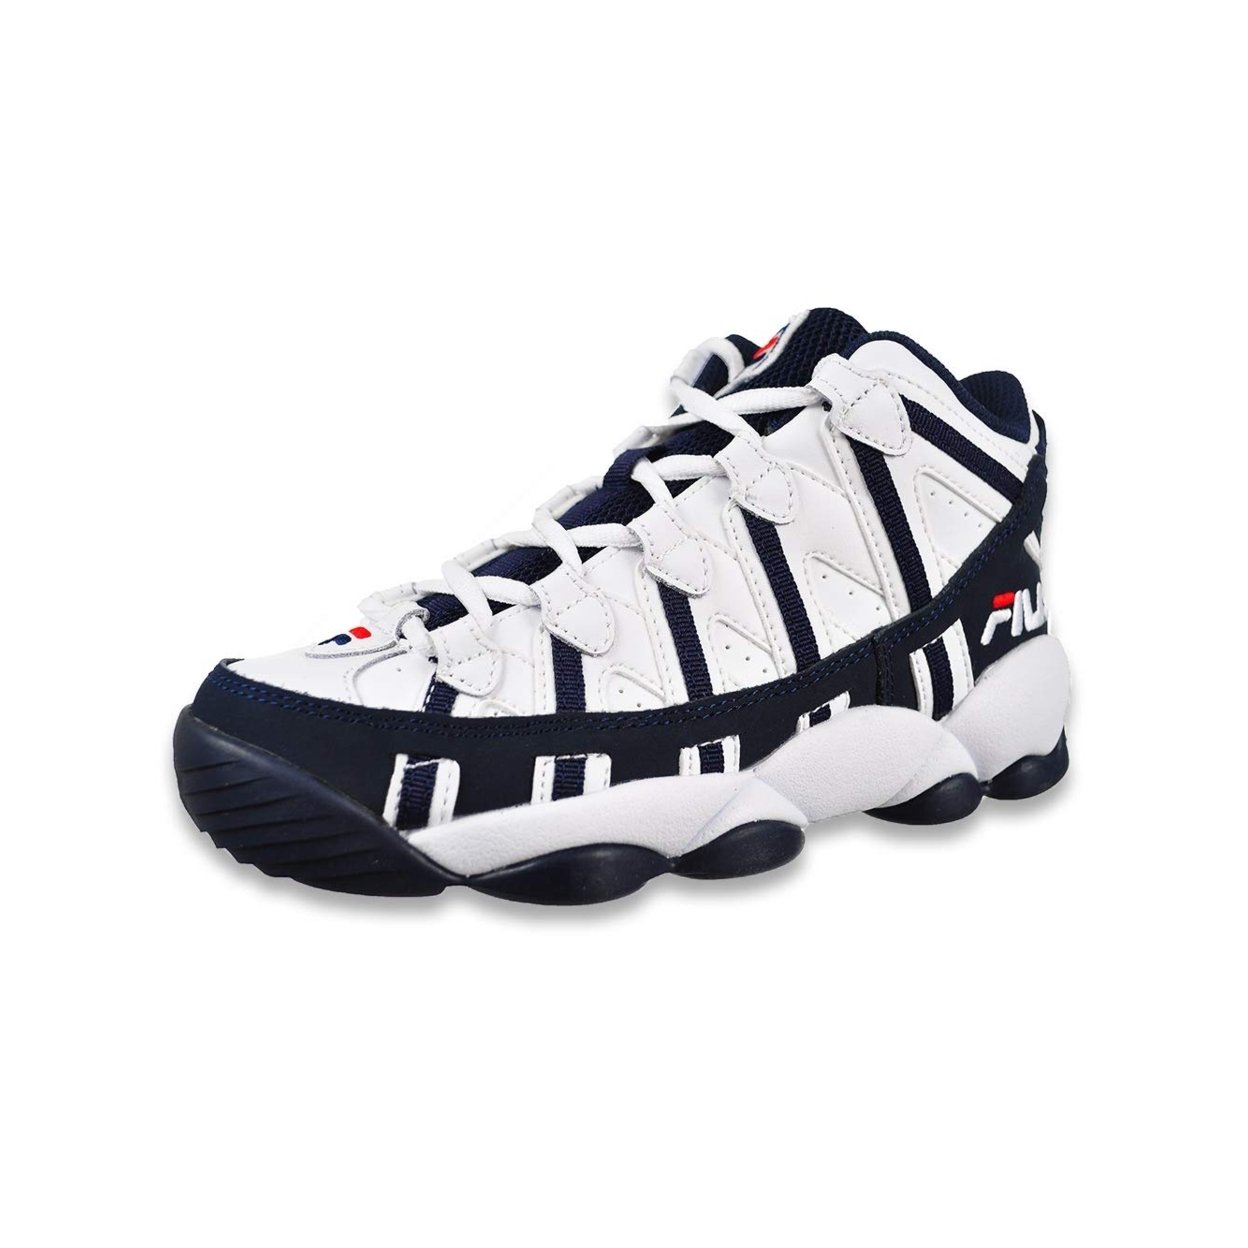 Fila Kids' Stackhouse Spaghetti Basketball Sneakers WHT/FNVY/FRED - WHT/FNVY/FRED, 3.5 Big Kid